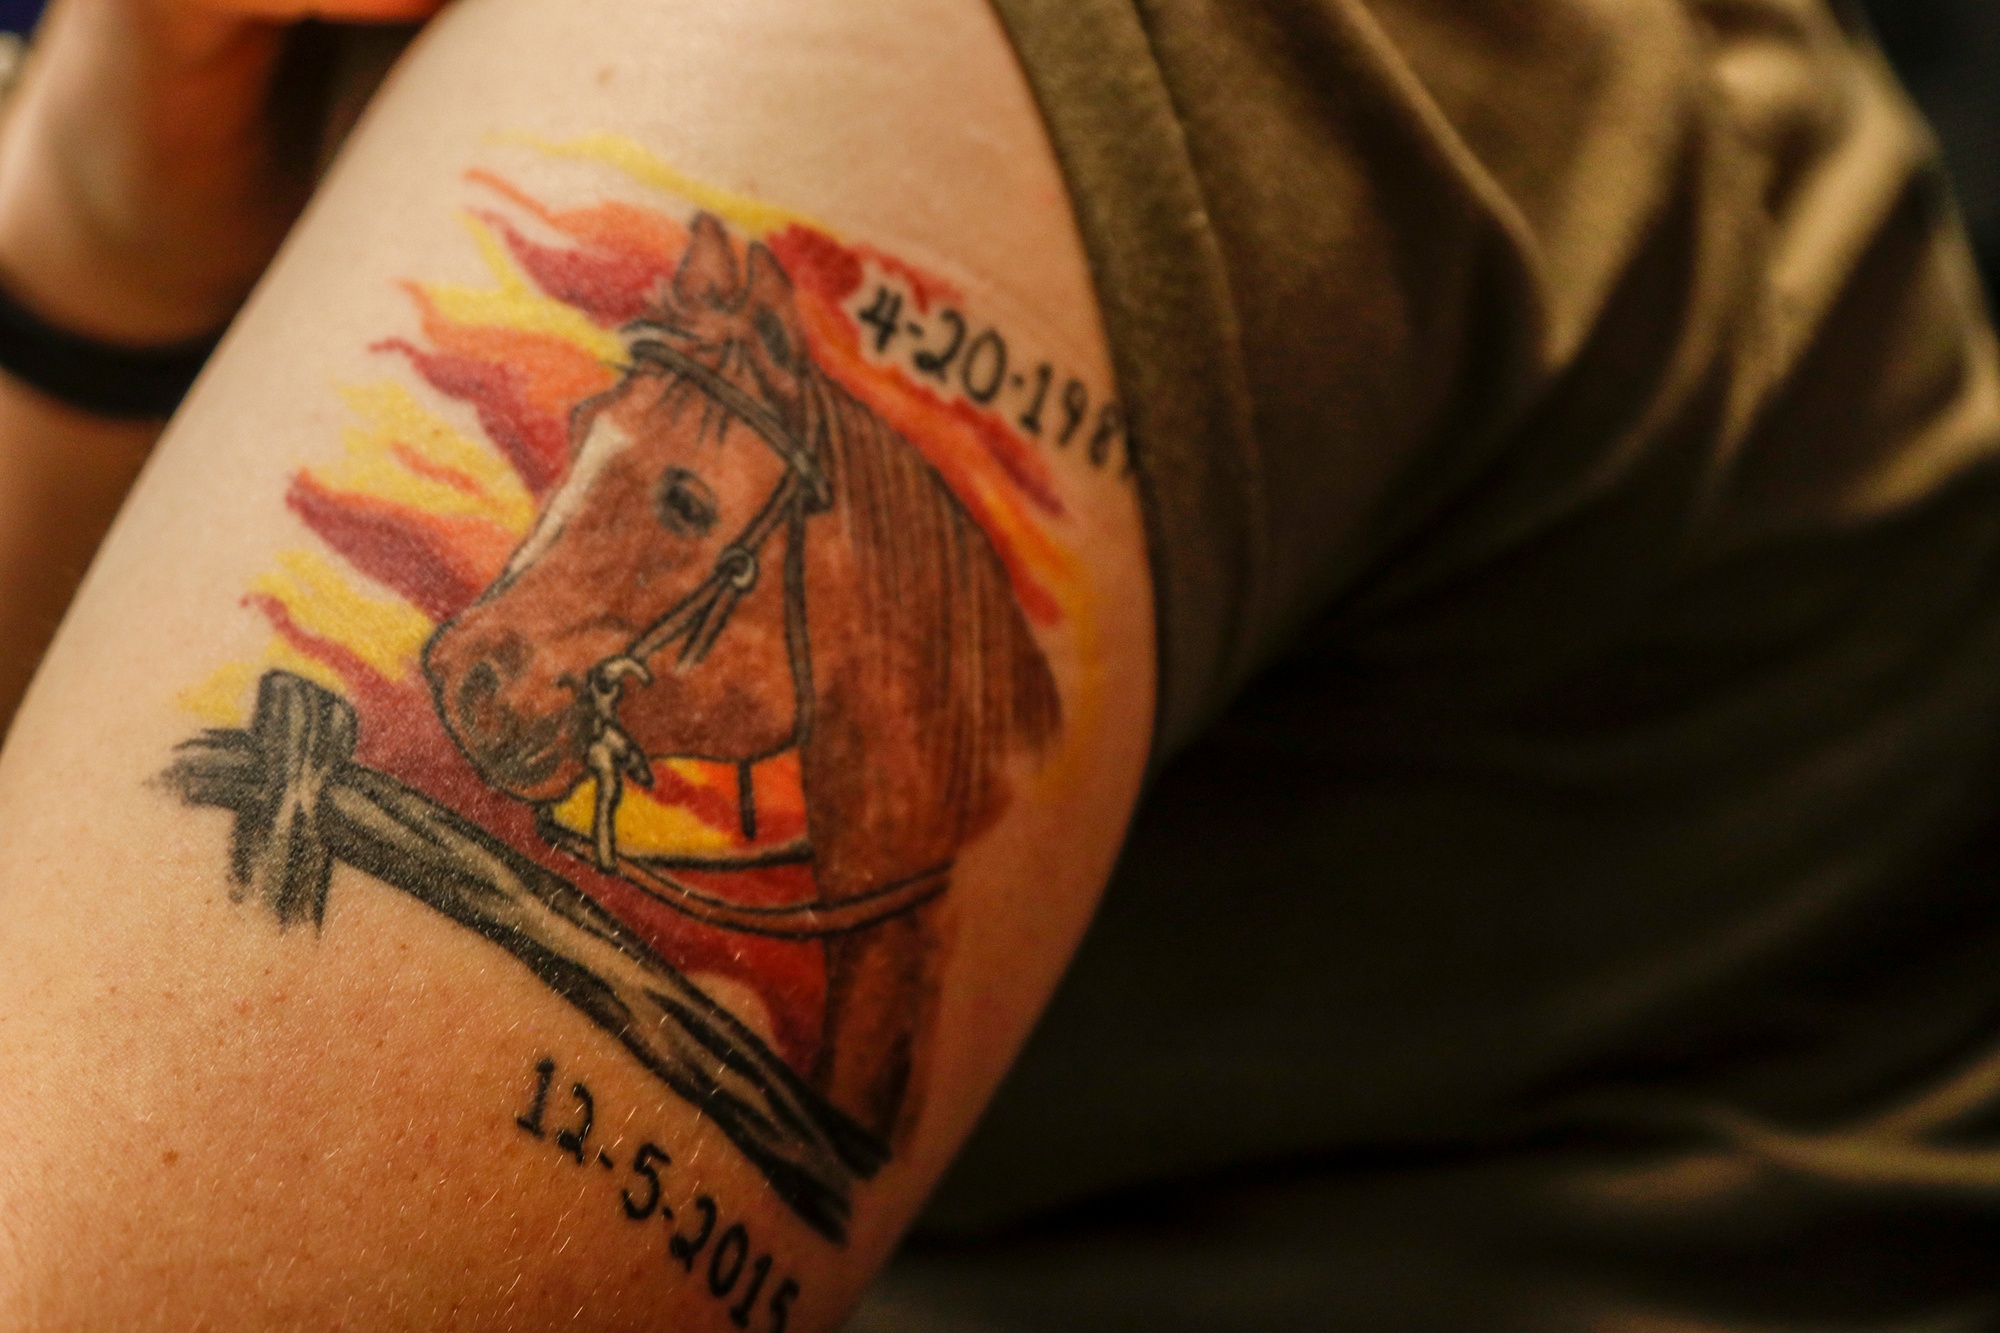 DVIDS - Images - Horse tattoo [Image 3 of 8]